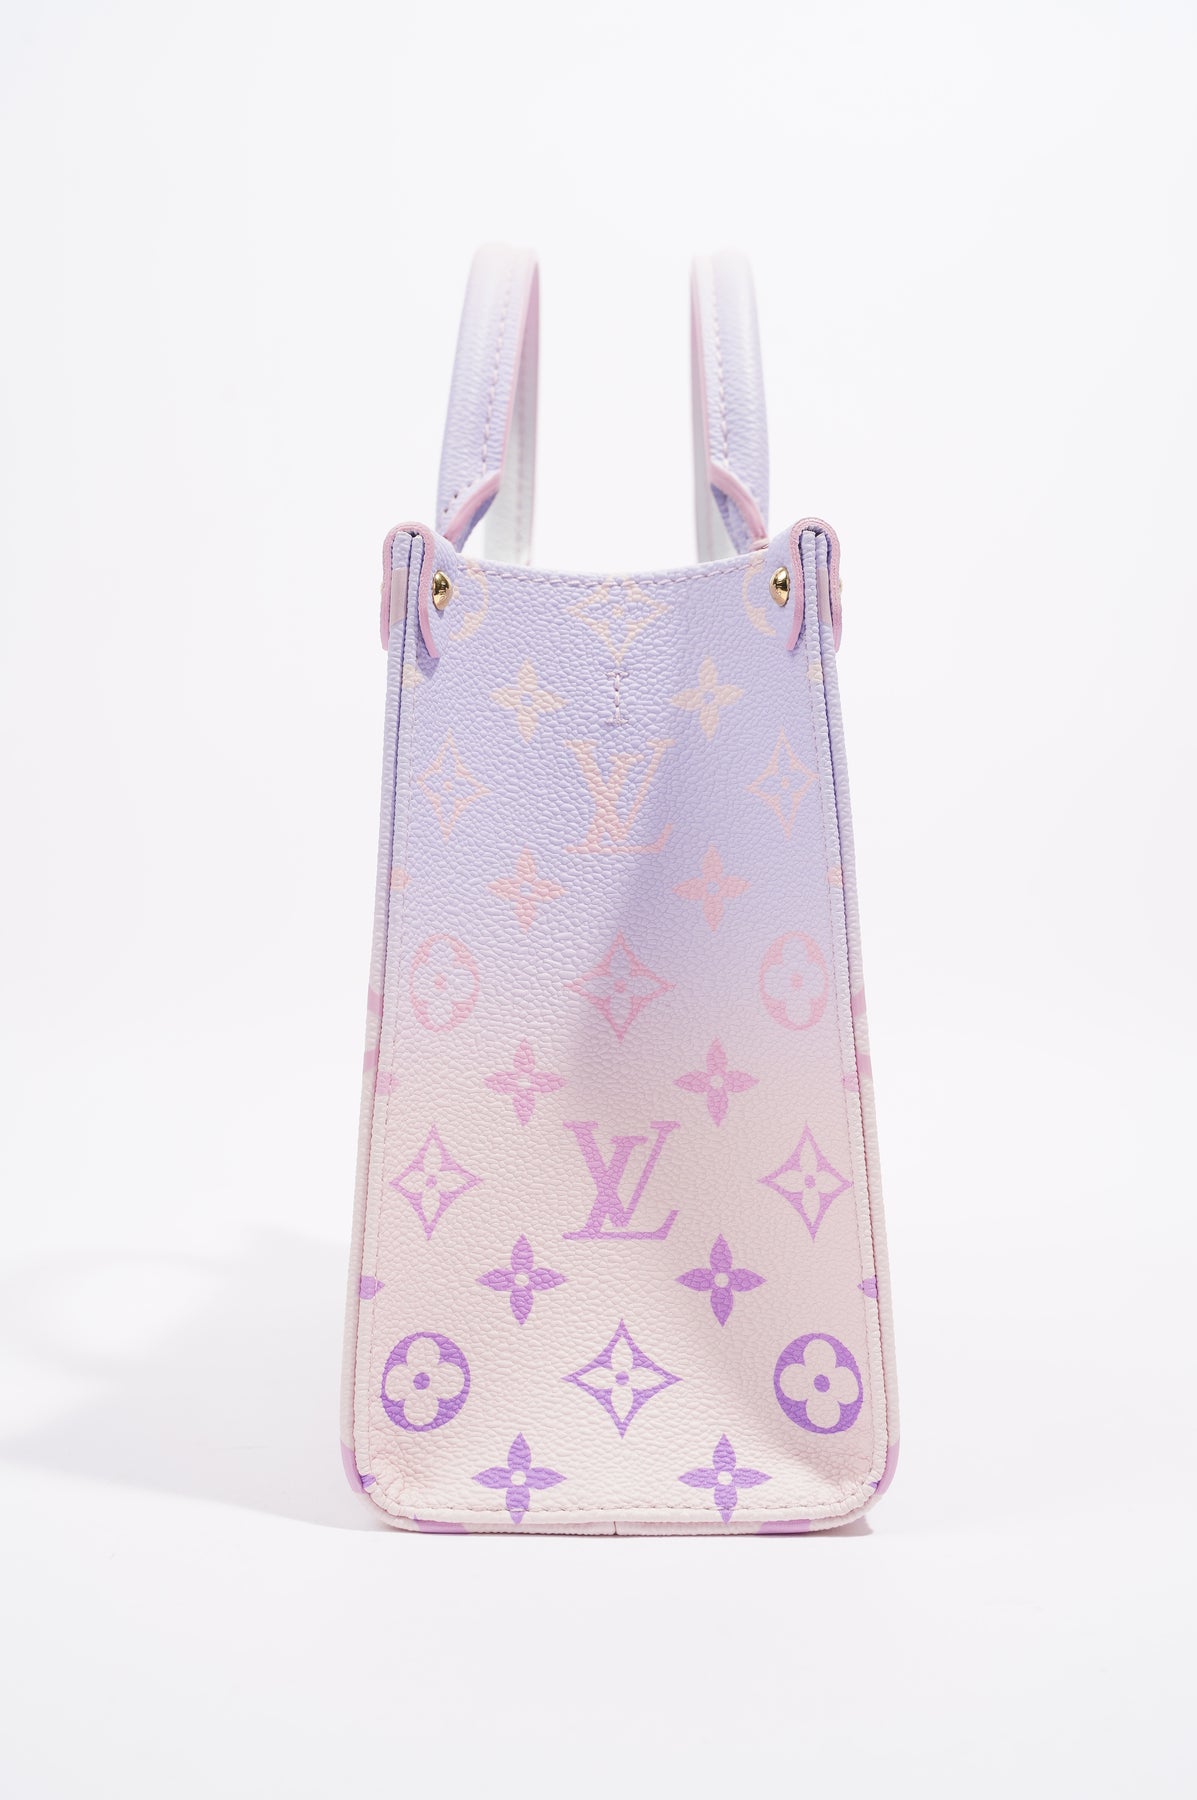 Newest member of the family. She's so stunning. On the Go PM in Sunrise  Pastel. #lv_world #louisvuitton